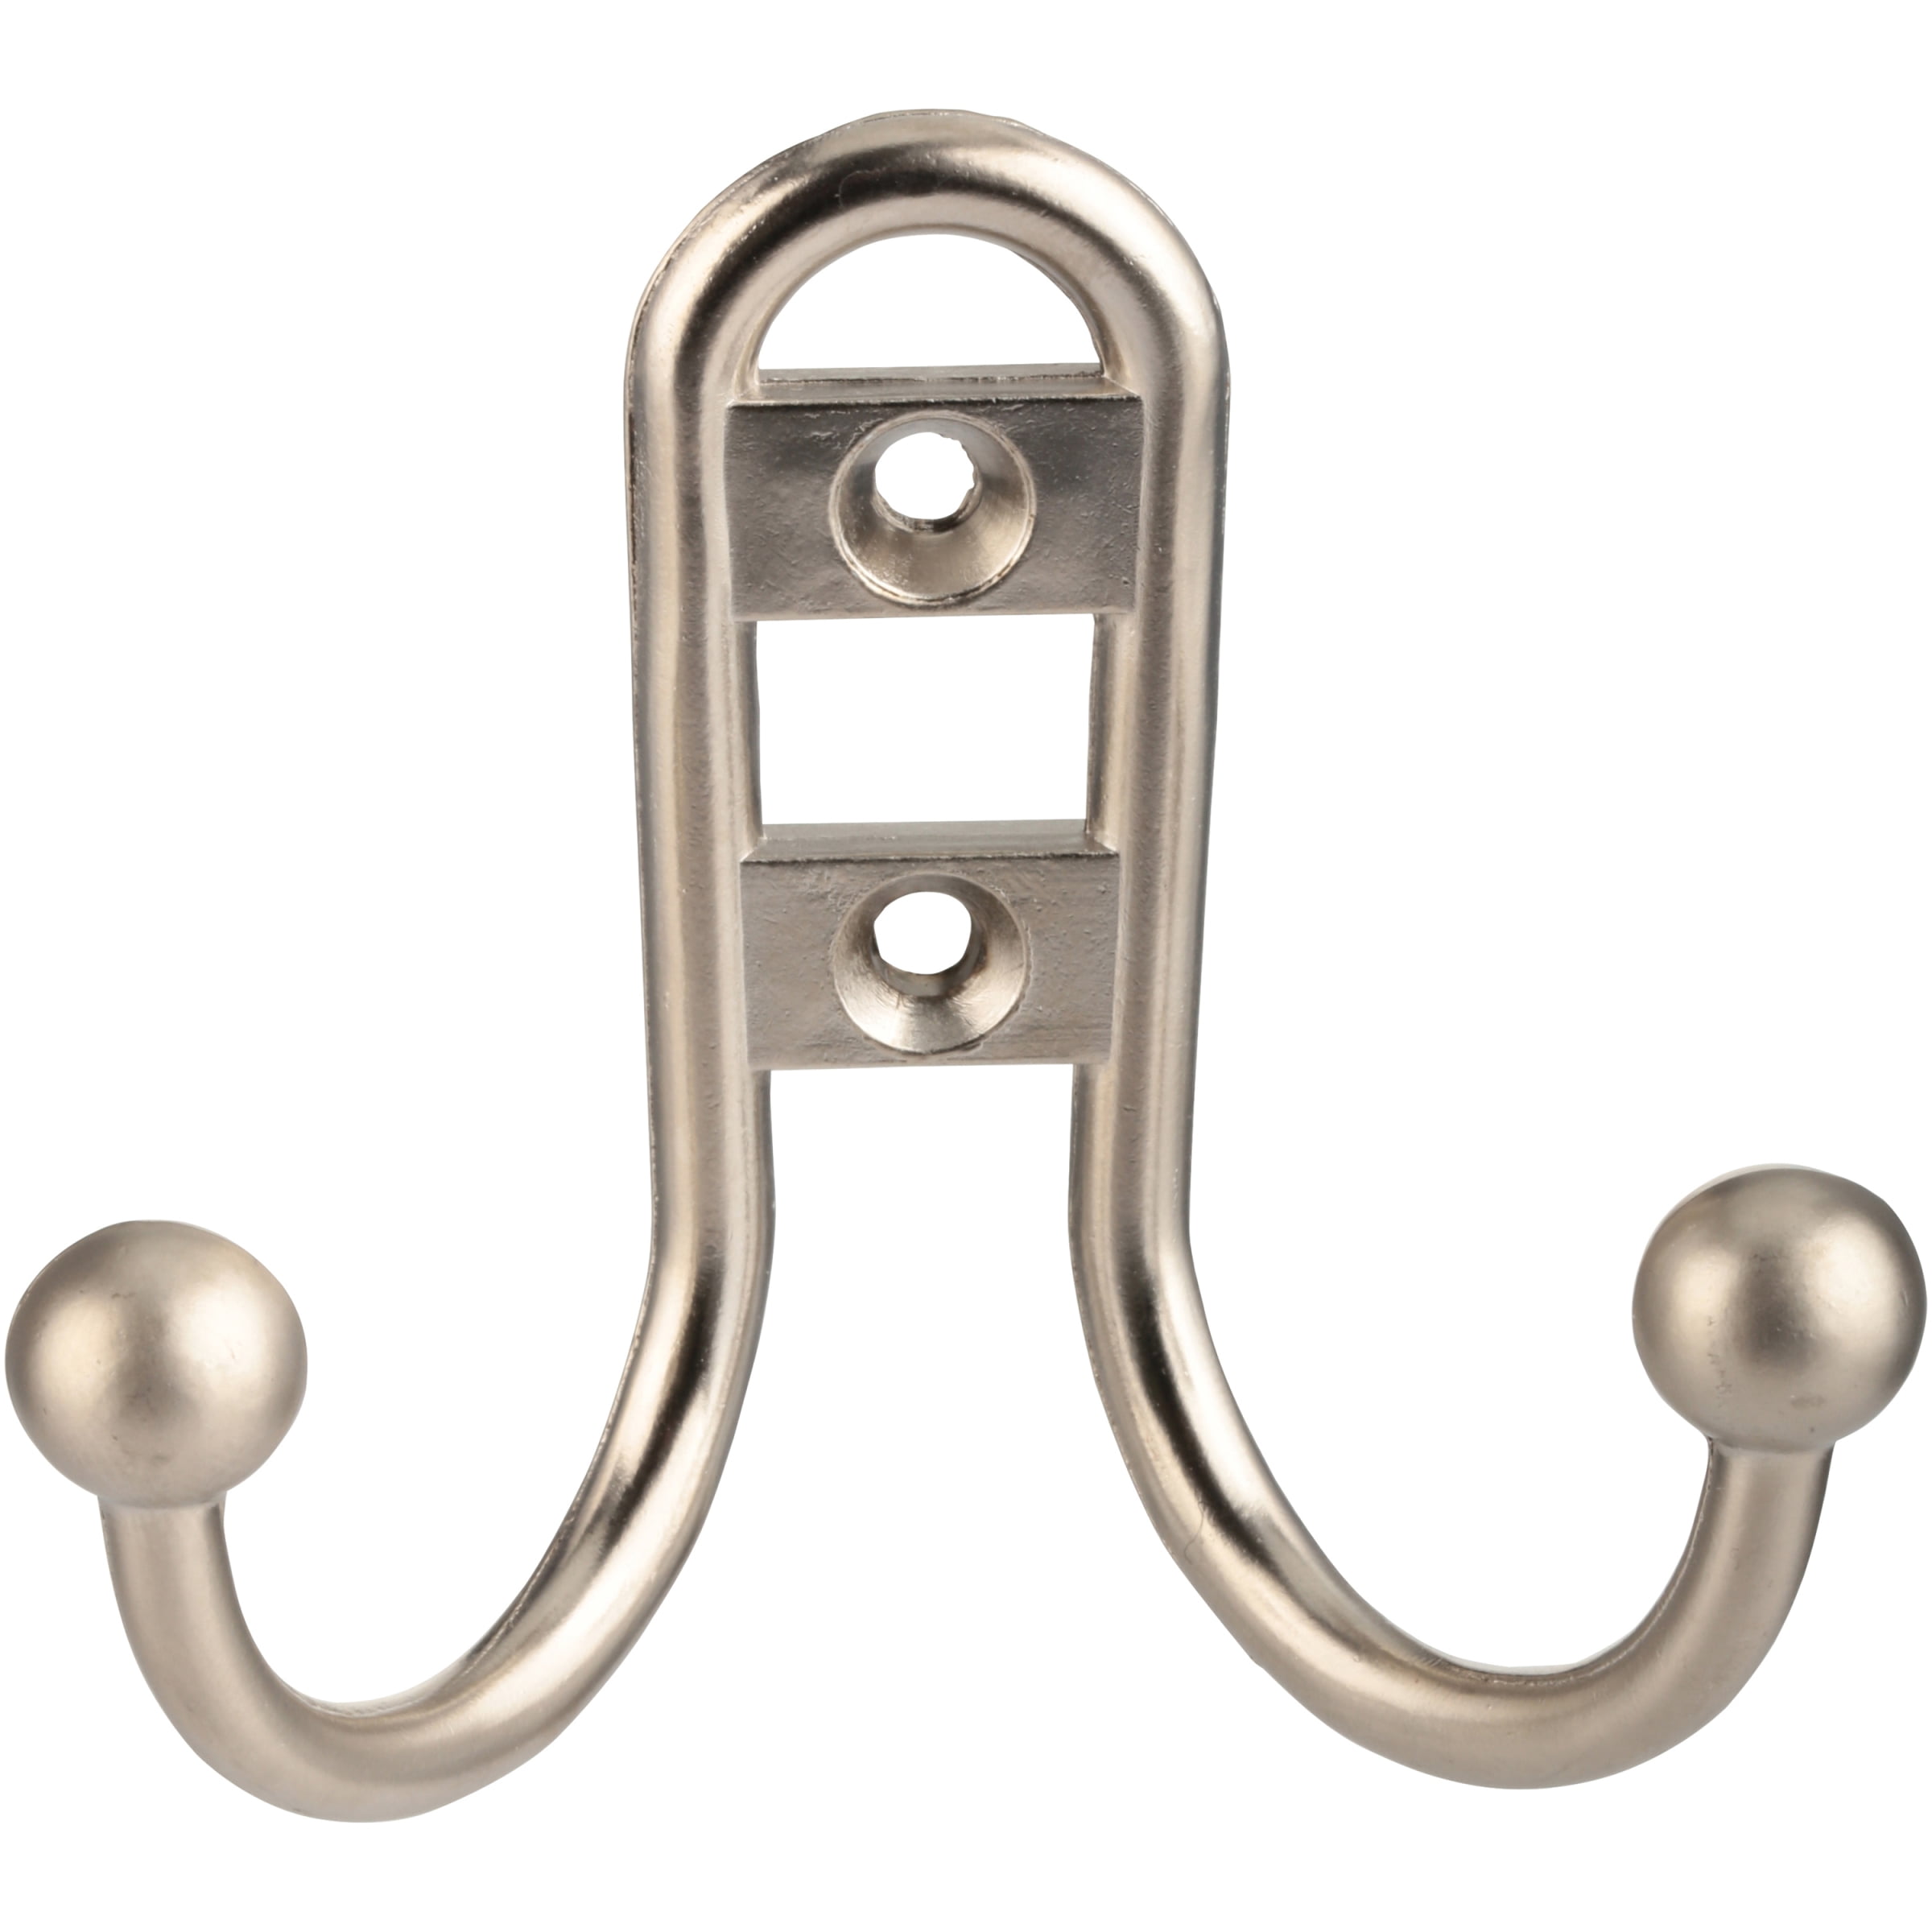 Mainstays, Double-Hook Coat Hook, Satin Nickel, Mounting Hardware Included,  10 lbs Limit 